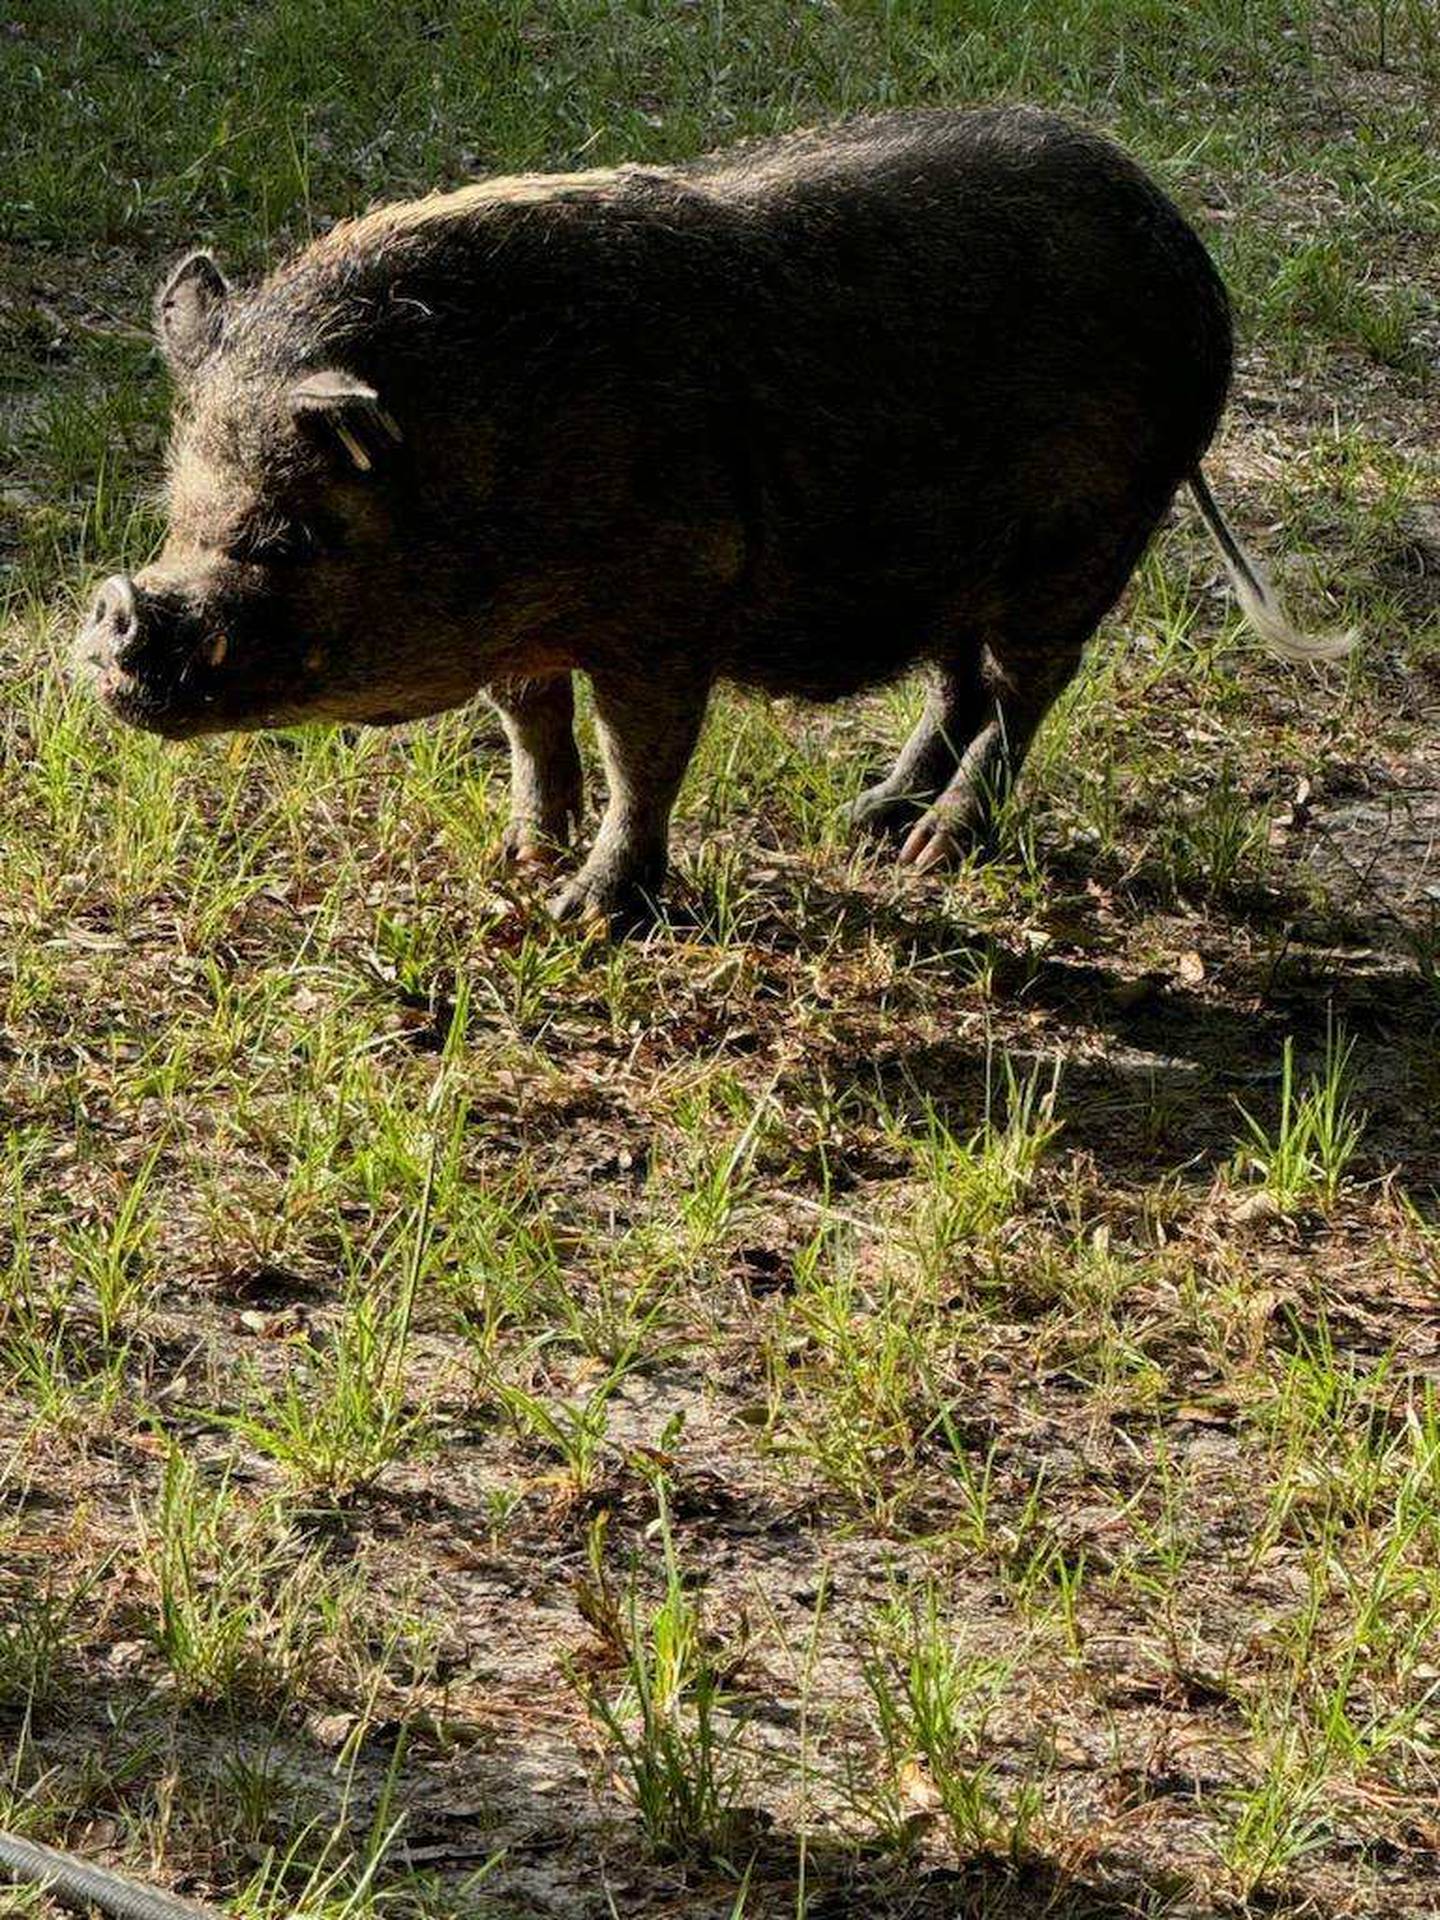 The pit bellied pigs were found in the area of O'leno State Park and deputies are looking for their owner.